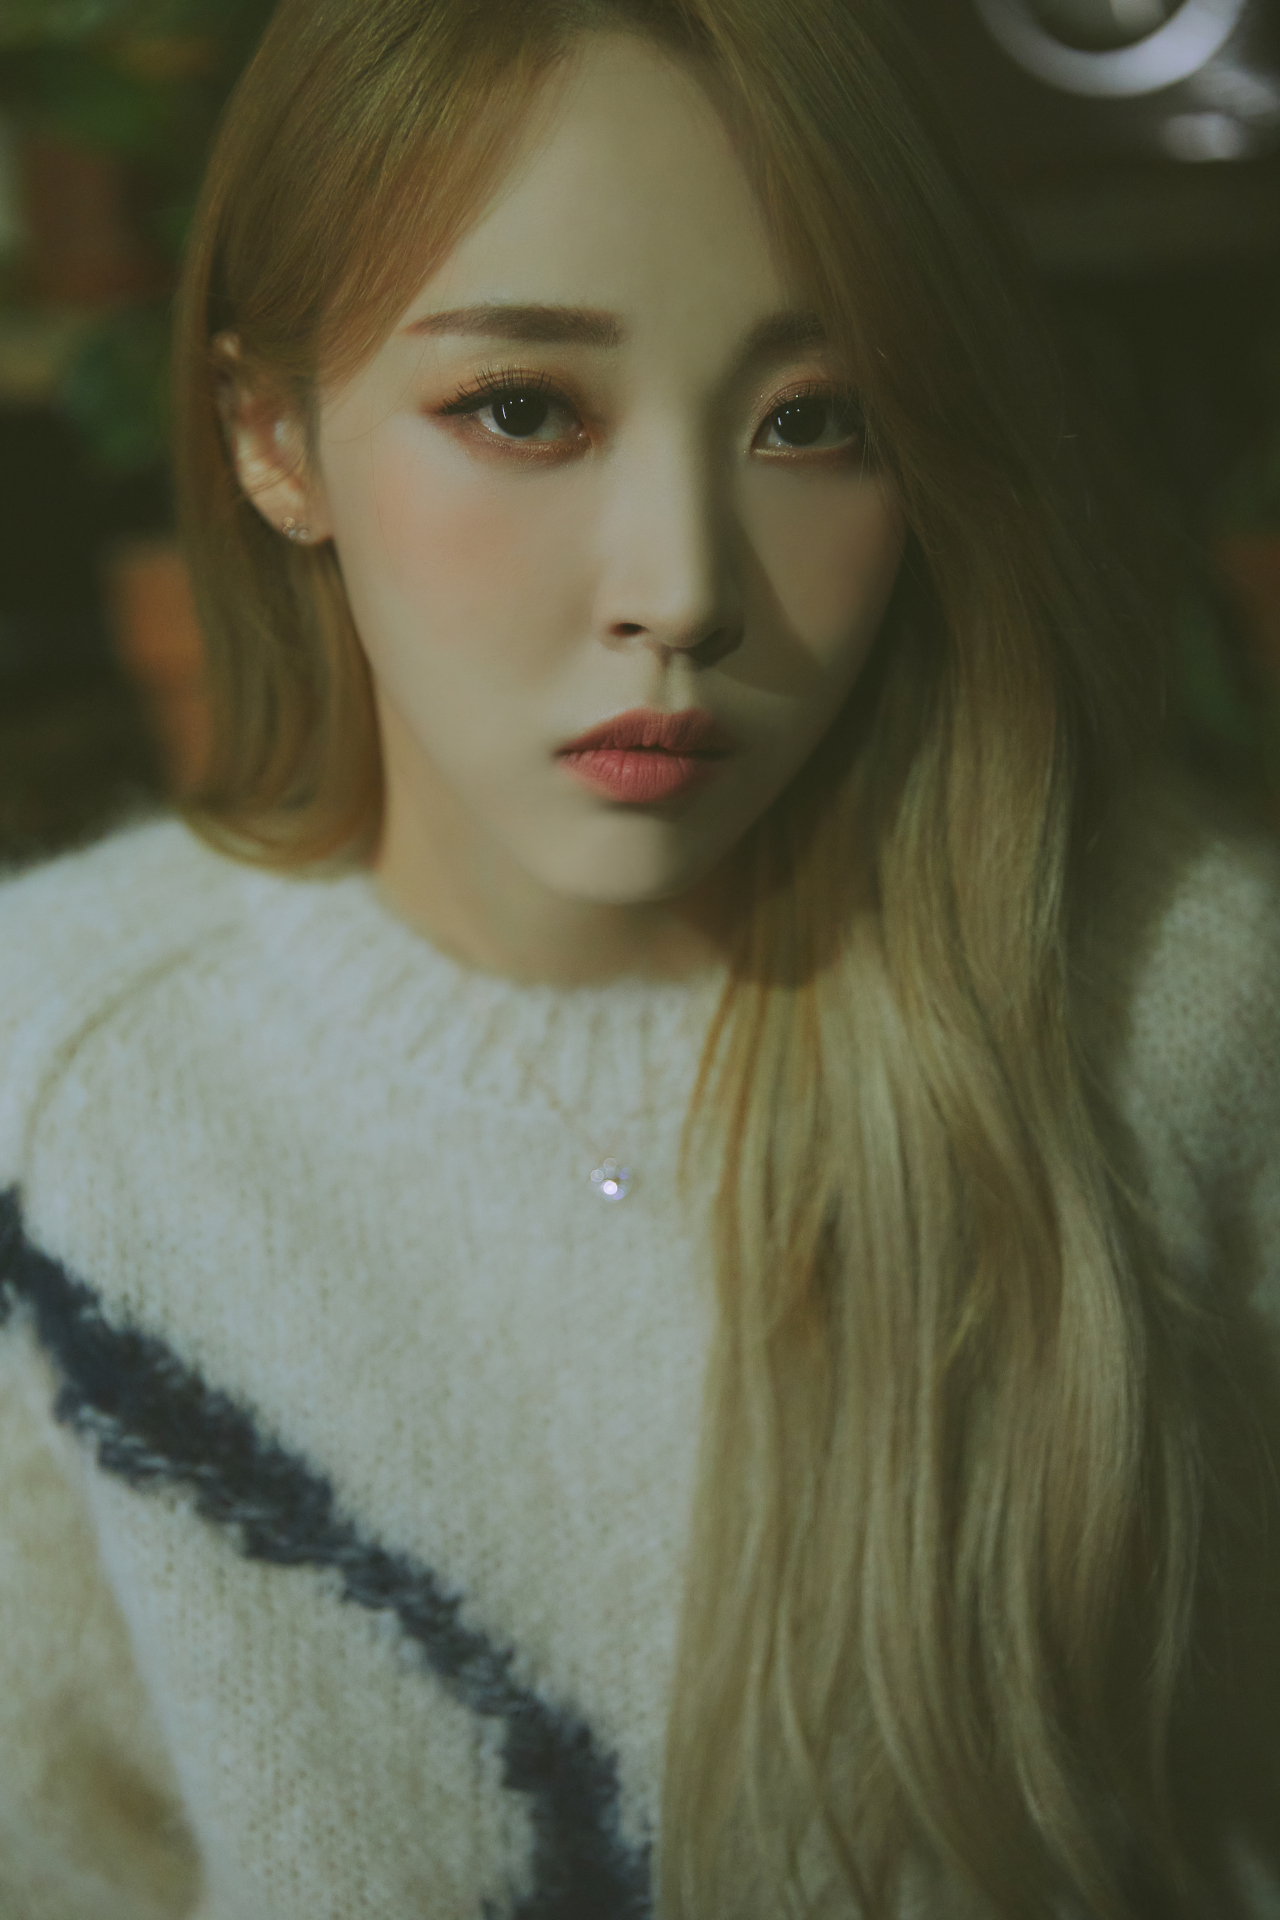 Concept images of Moonbyul in her new title song “Lunatic” of her third EP “6equence.” (RBW)